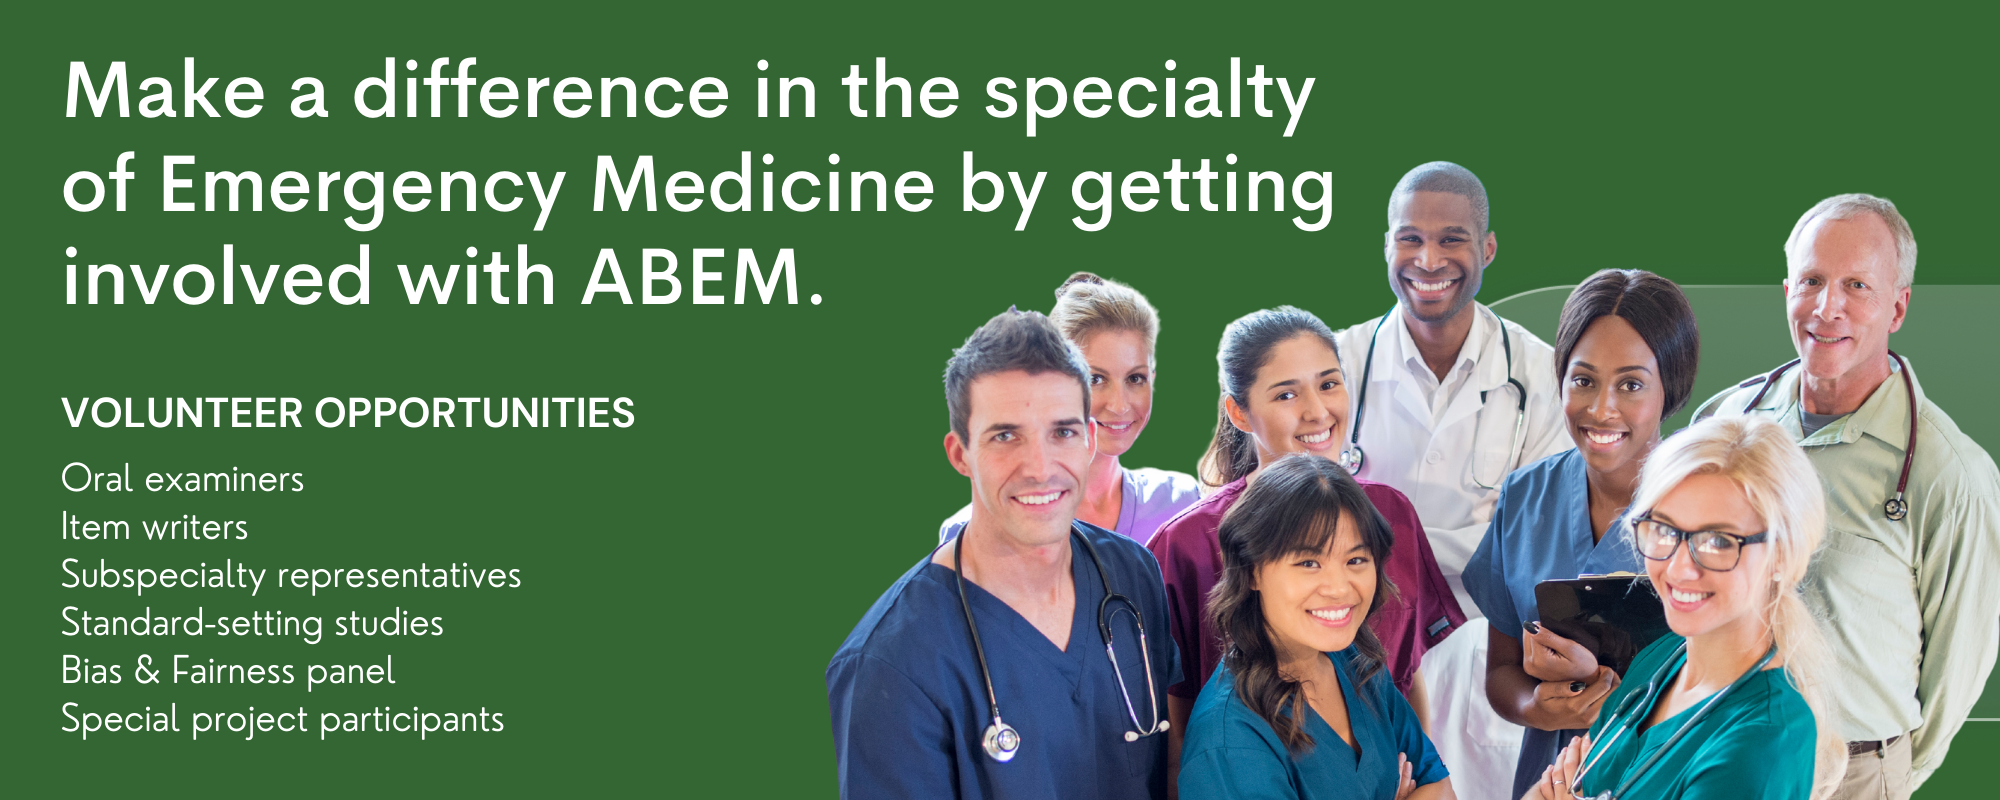 Make a difference in the specialty of Emergency Medicine by getting involved with ABEM. (1)